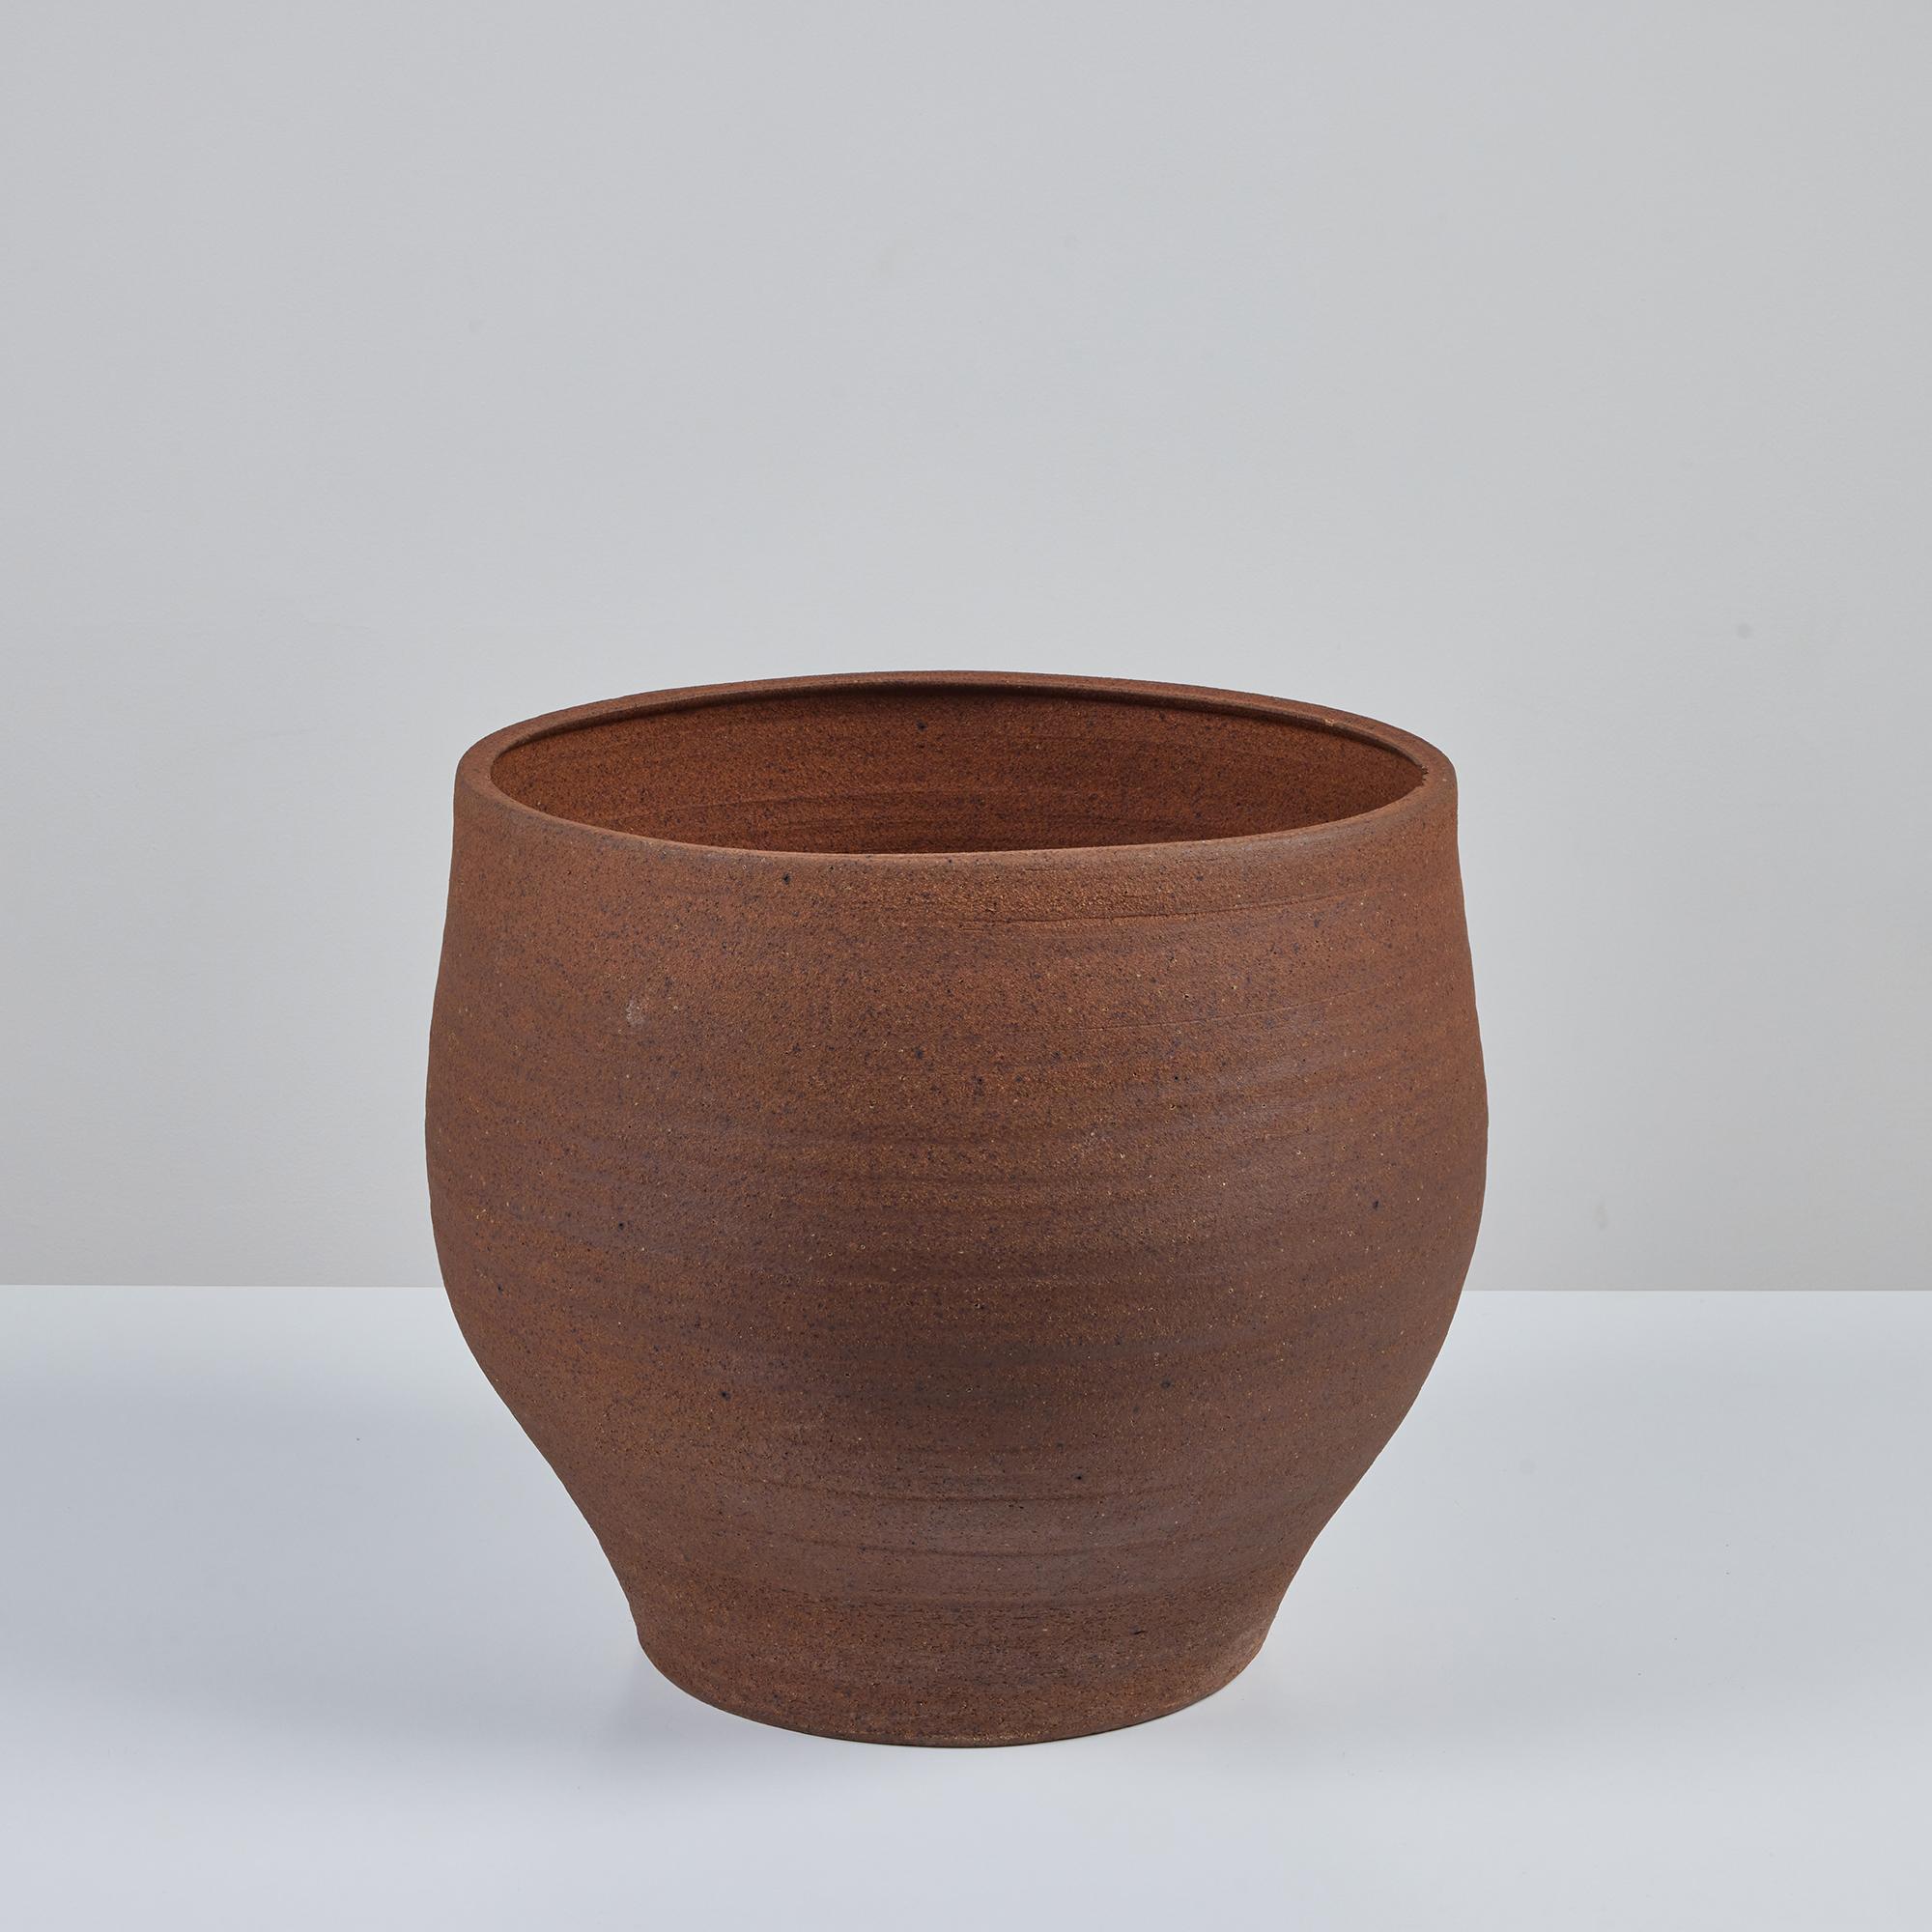 Hand Thrown stoneware planter by John Follis for Architectural Pottery, C.1960s, USA. The bell shaped planter, features the warm natural clay tones with light speckling. Our favorite detail of this planter are the finger groove created throughout